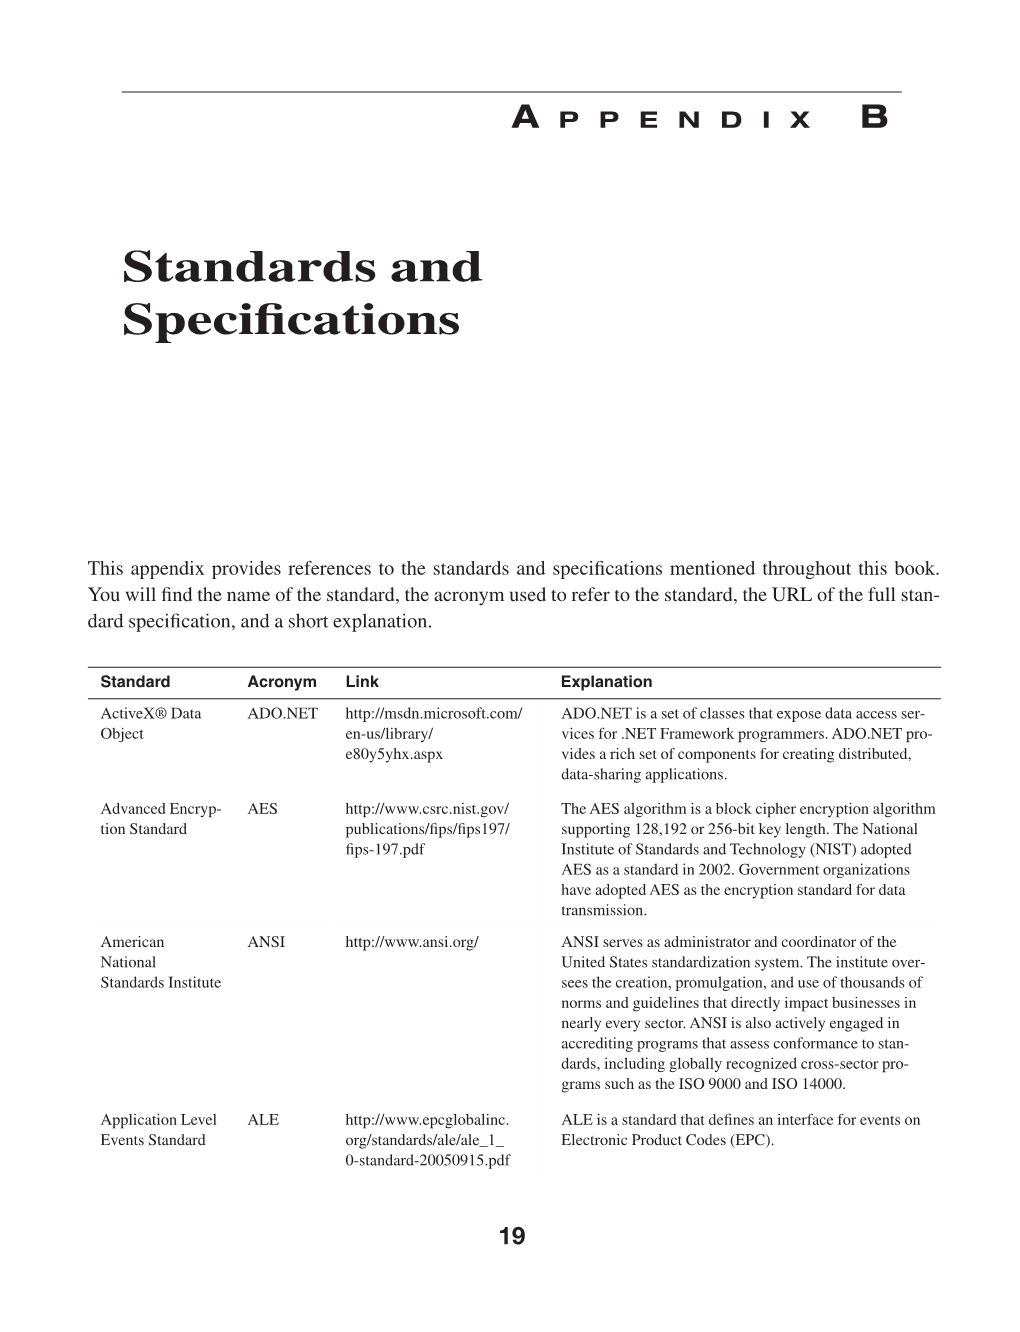 Standards and Specifications